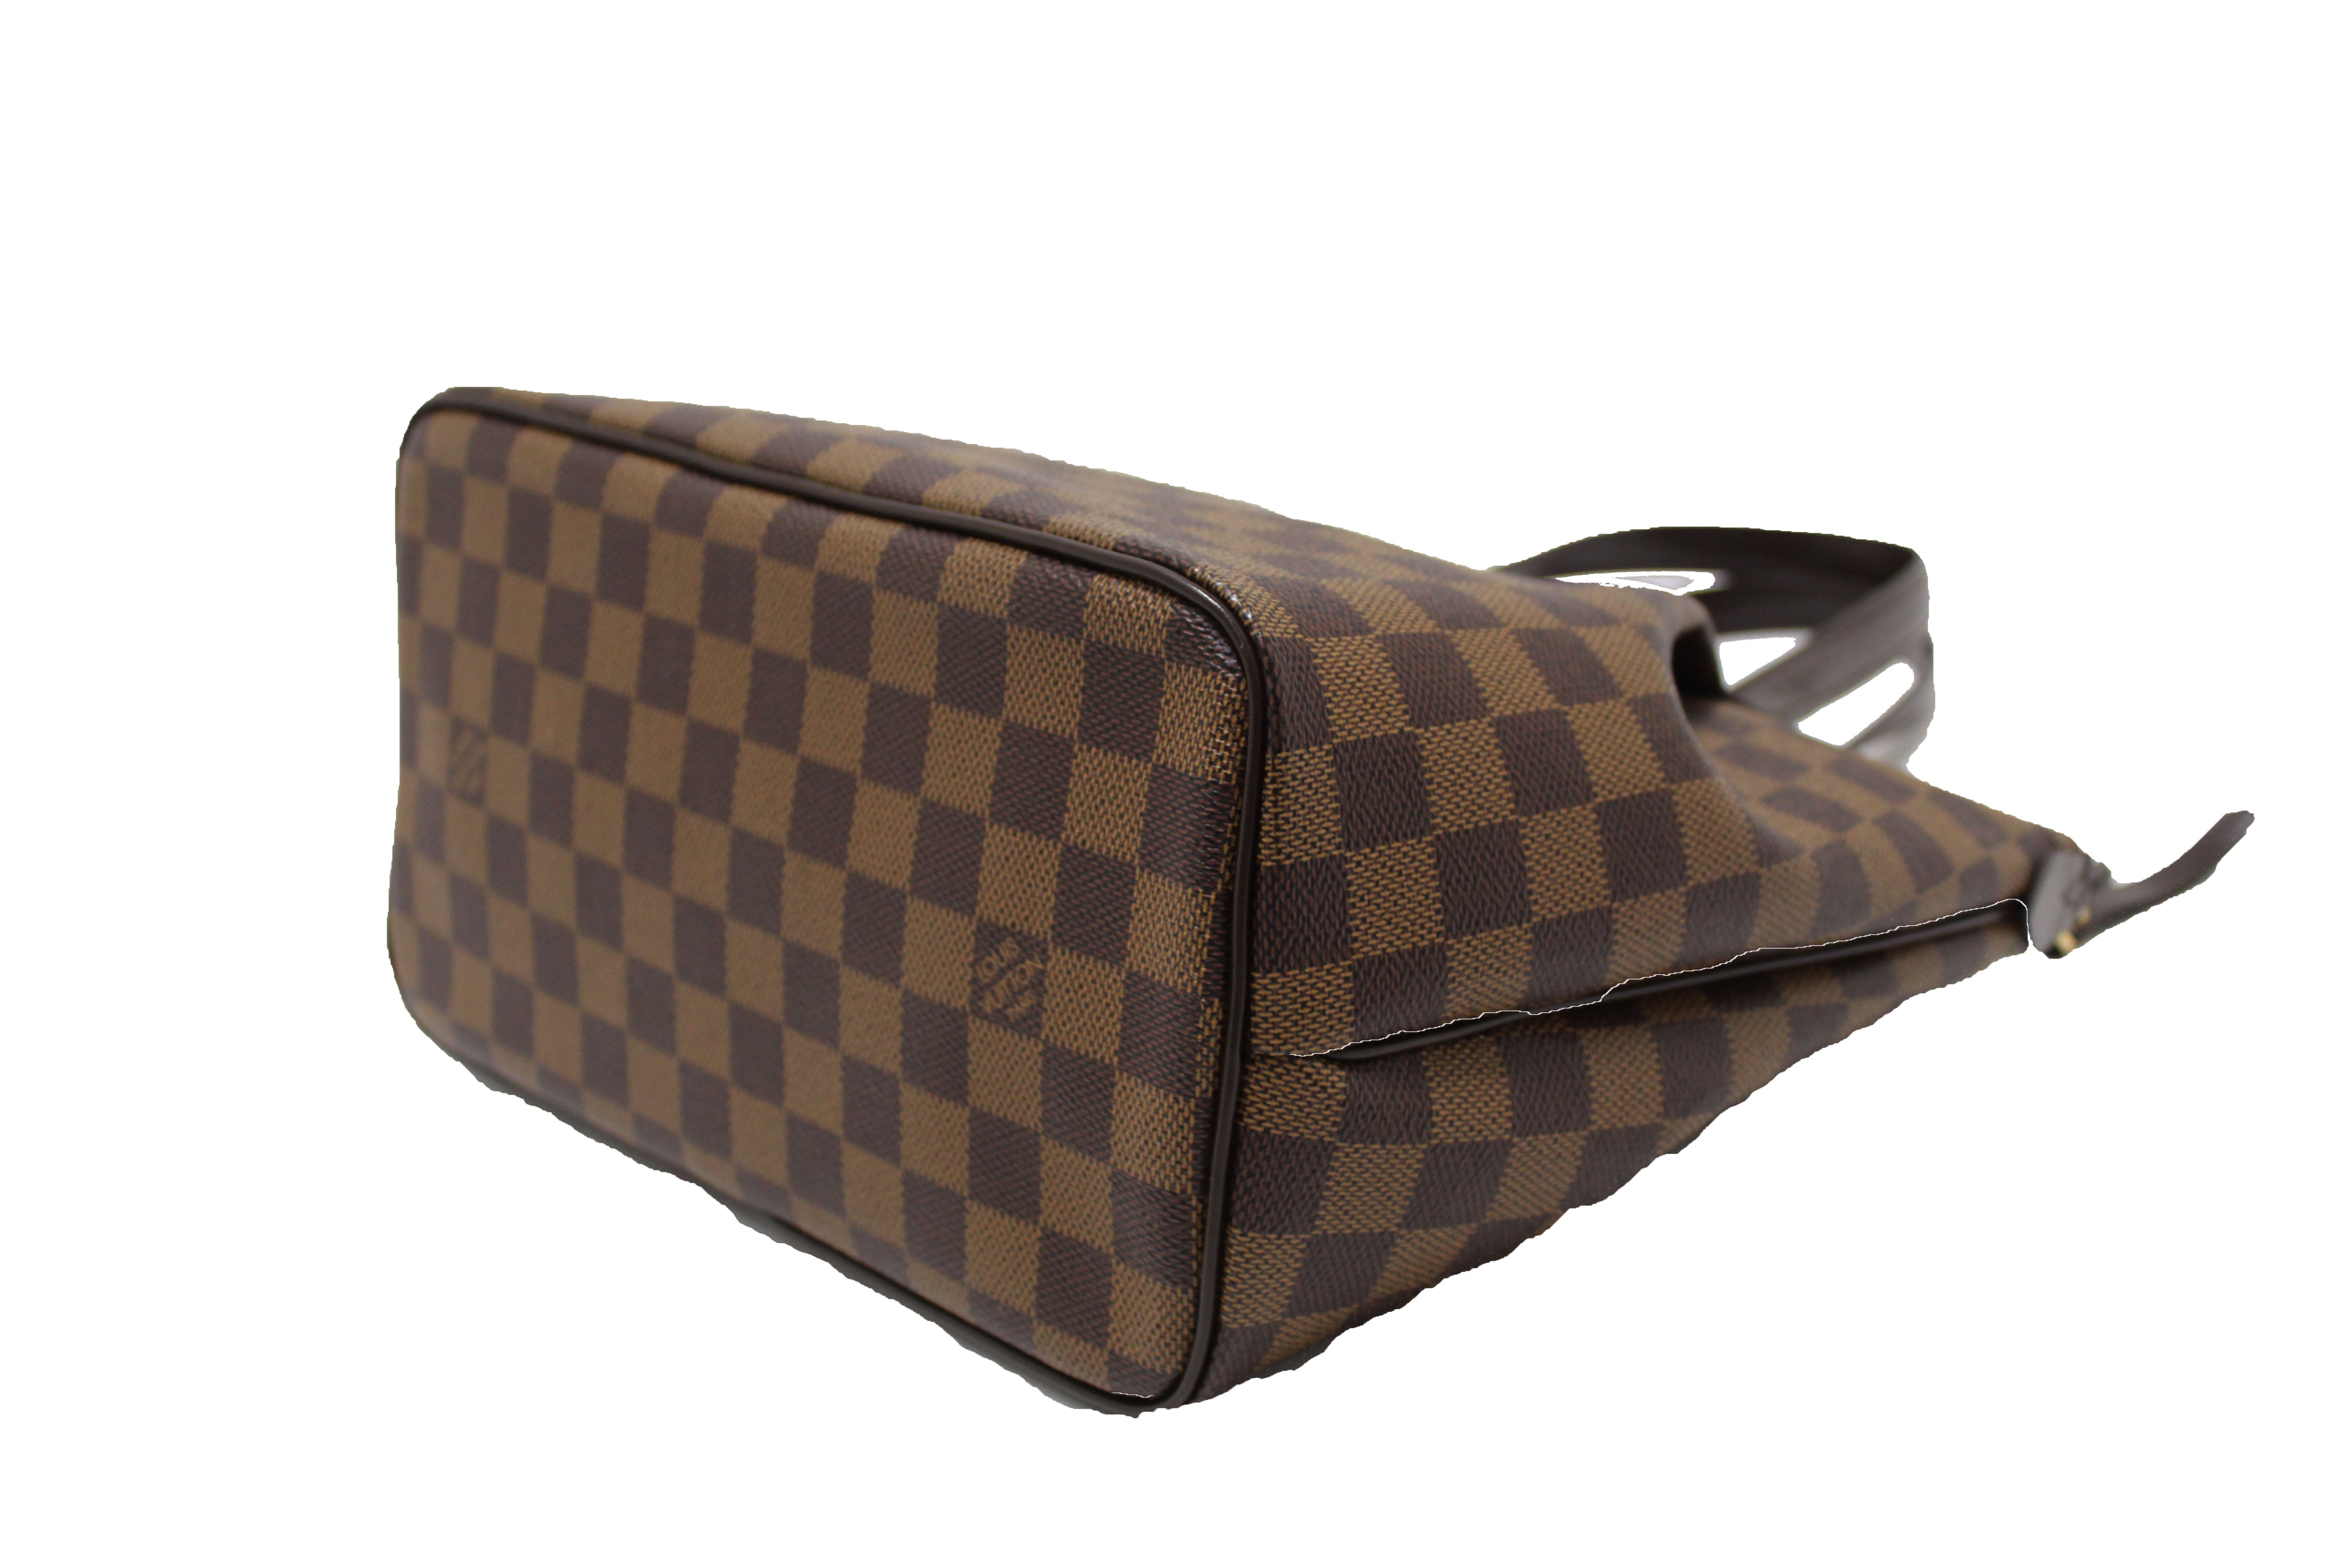 LOUIS VUITTON Damier Ebene Westminster PM Tote Bag N41102 LV Auth